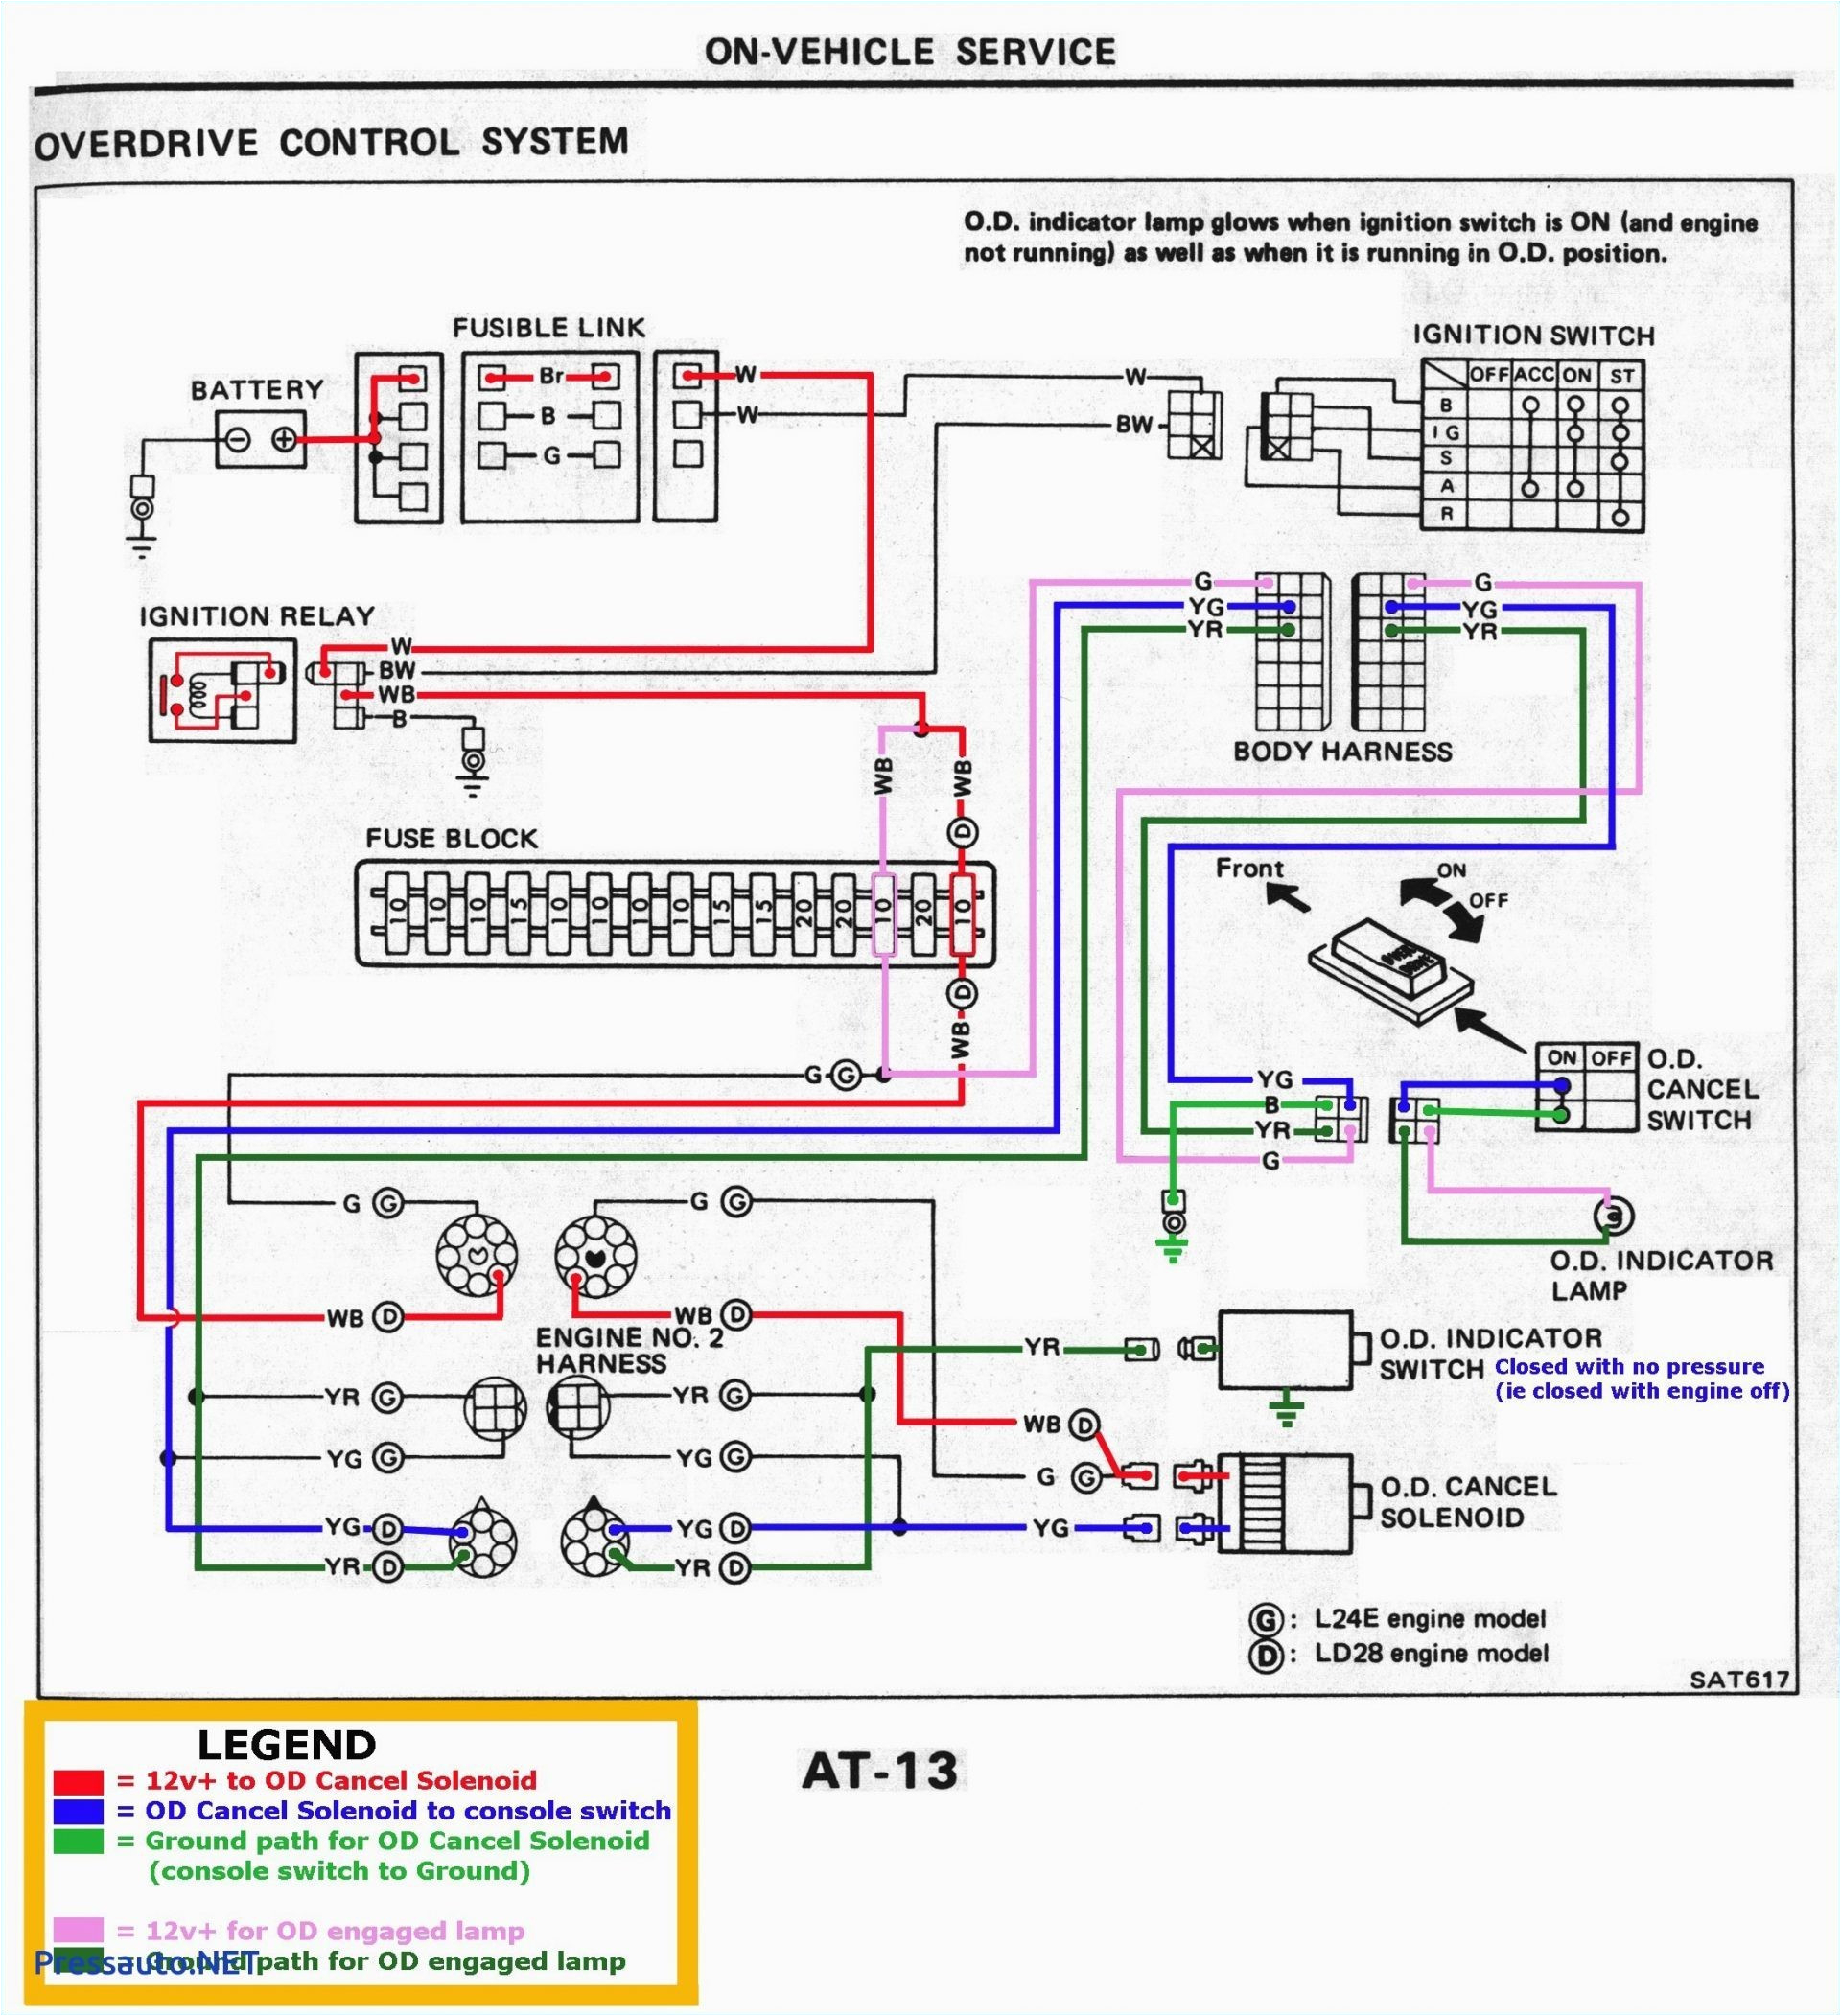 1996 sebring ignition switch wiring diagram color code wiring electrical wire color codes lzk gallery